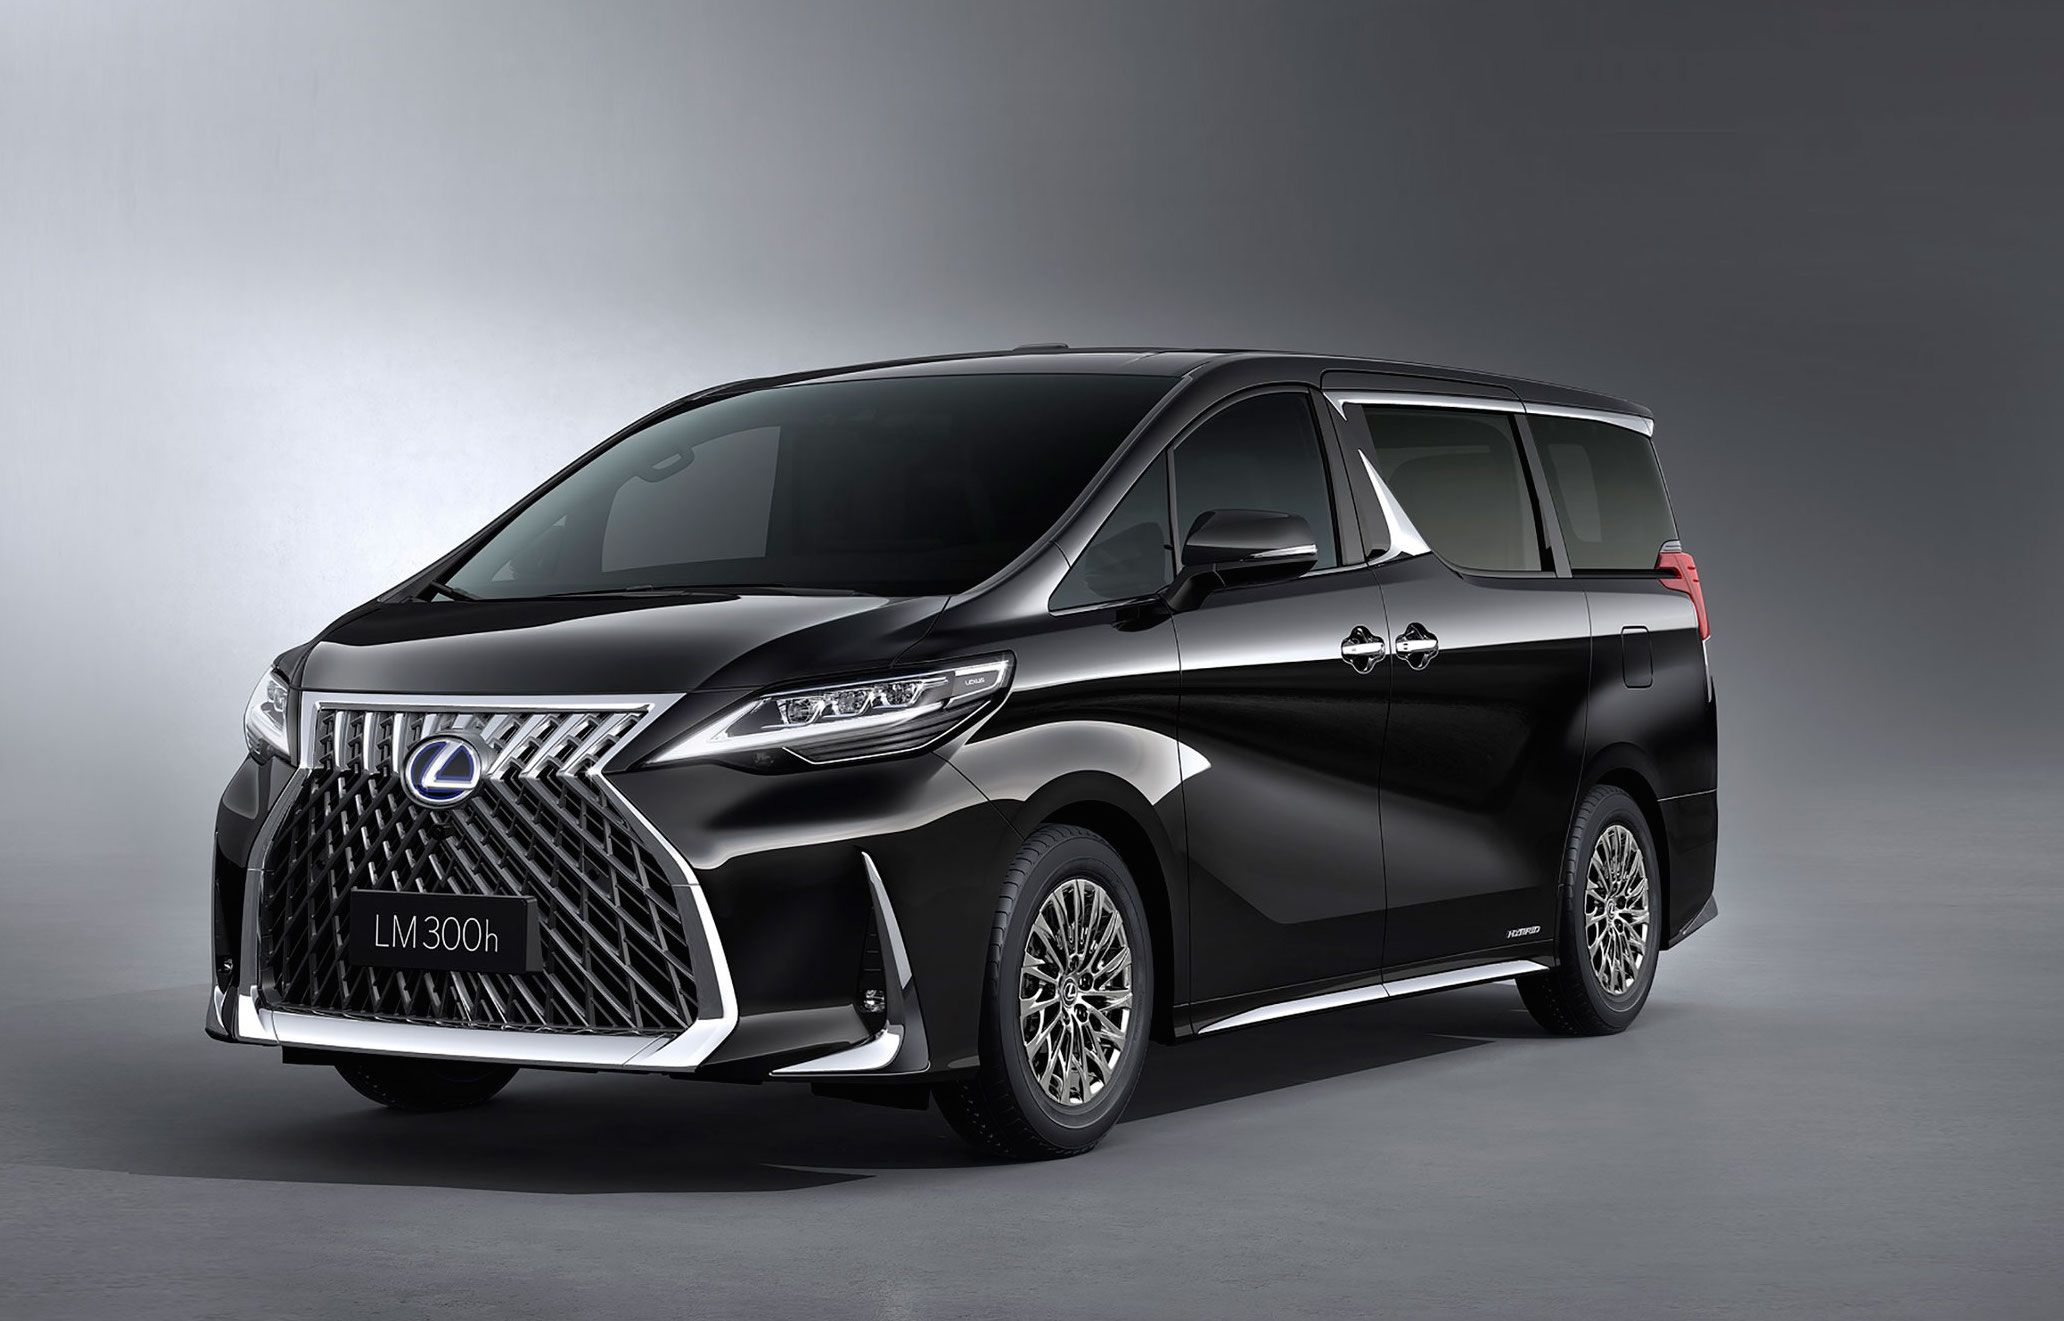 Lexus LM Minivan Is Executive Transportation You Must See to Believe